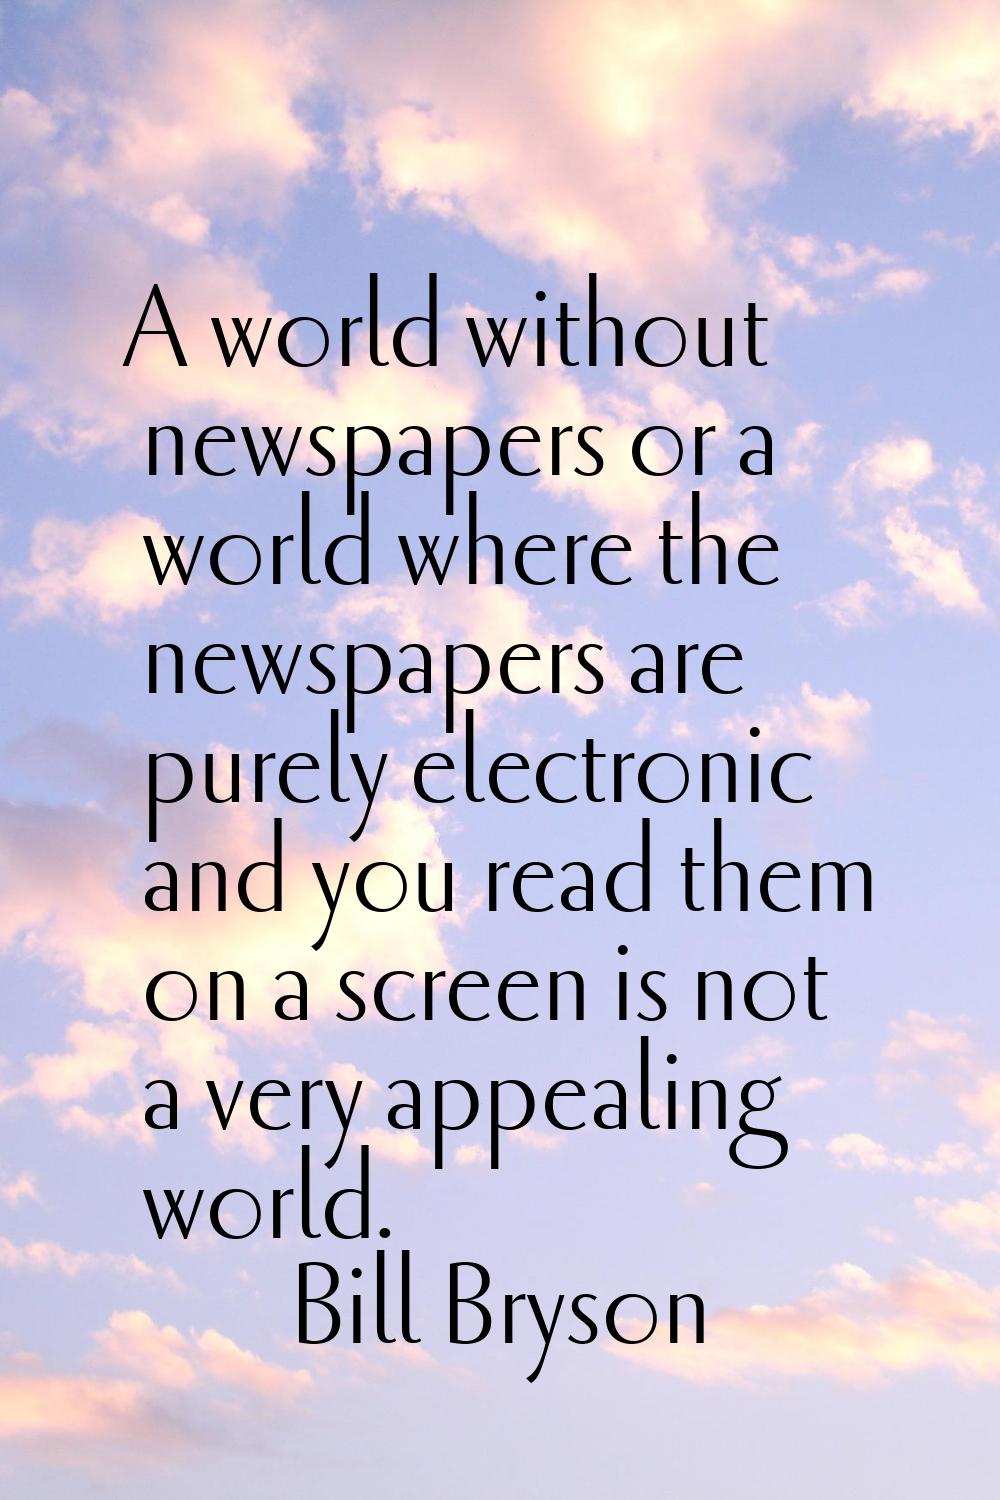 A world without newspapers or a world where the newspapers are purely electronic and you read them 